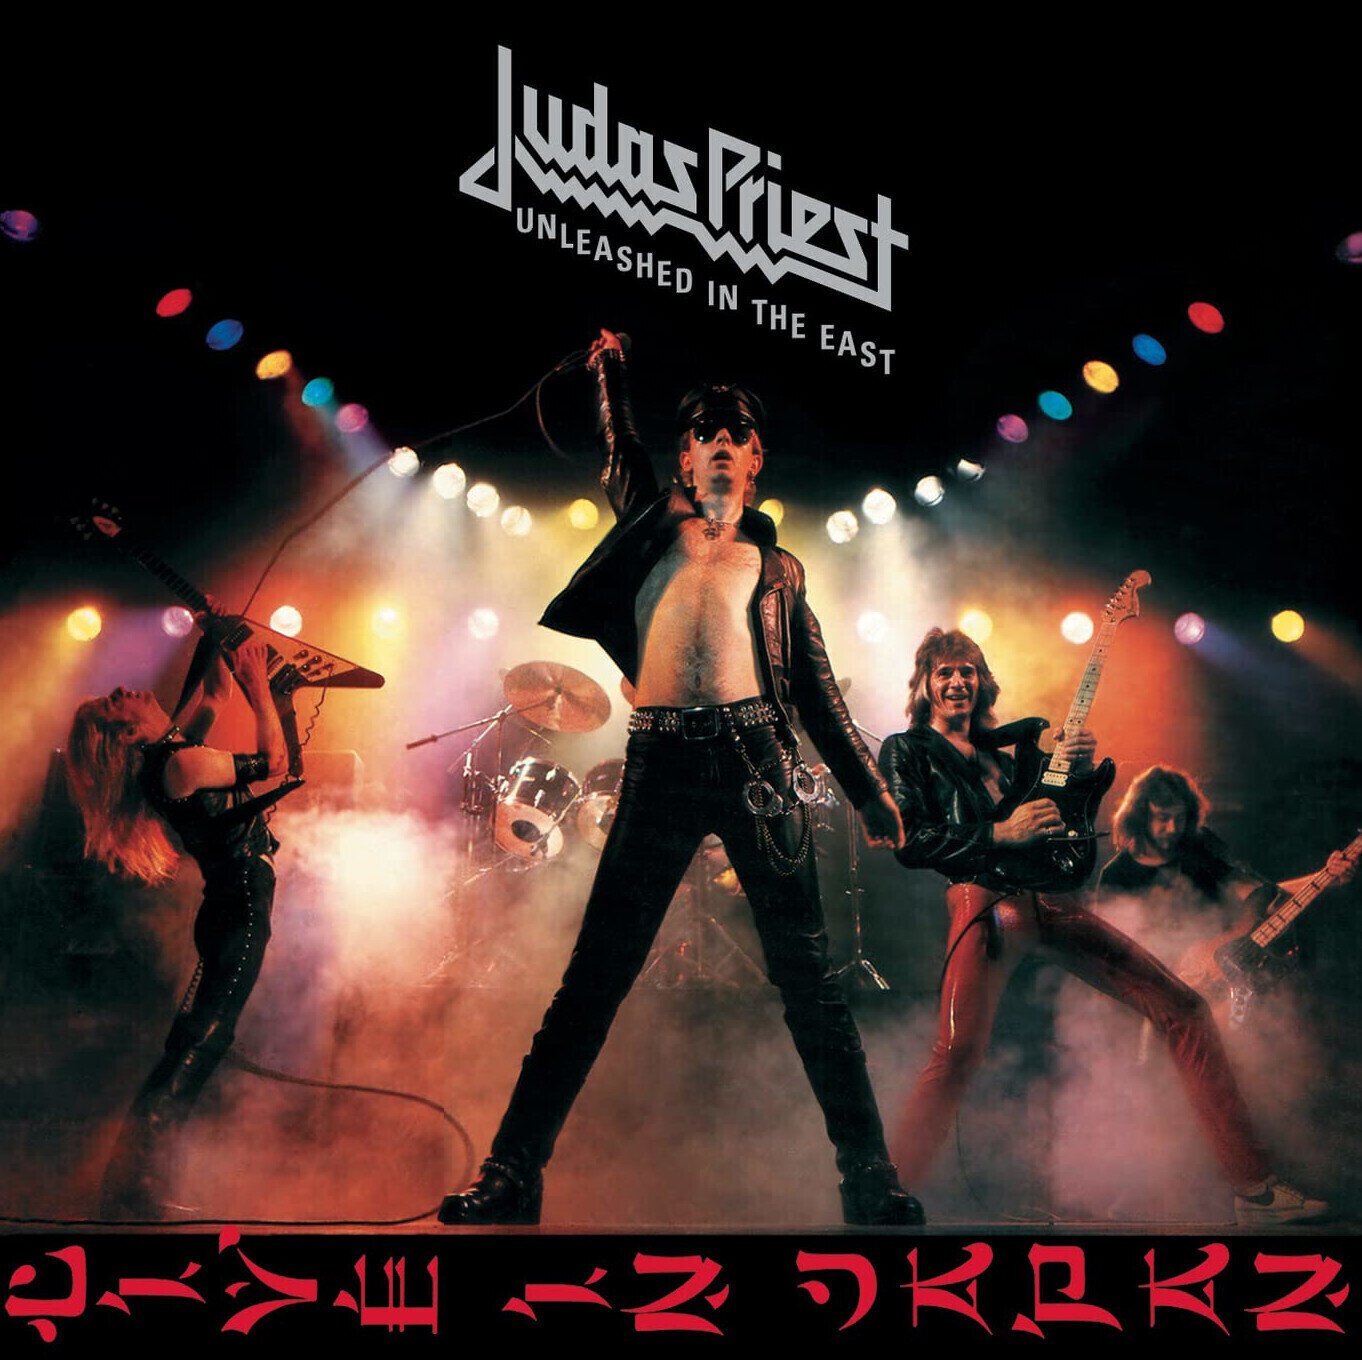 CD de música Judas Priest - Unleashed In The East (Live In Japan) (Remastered) (CD)